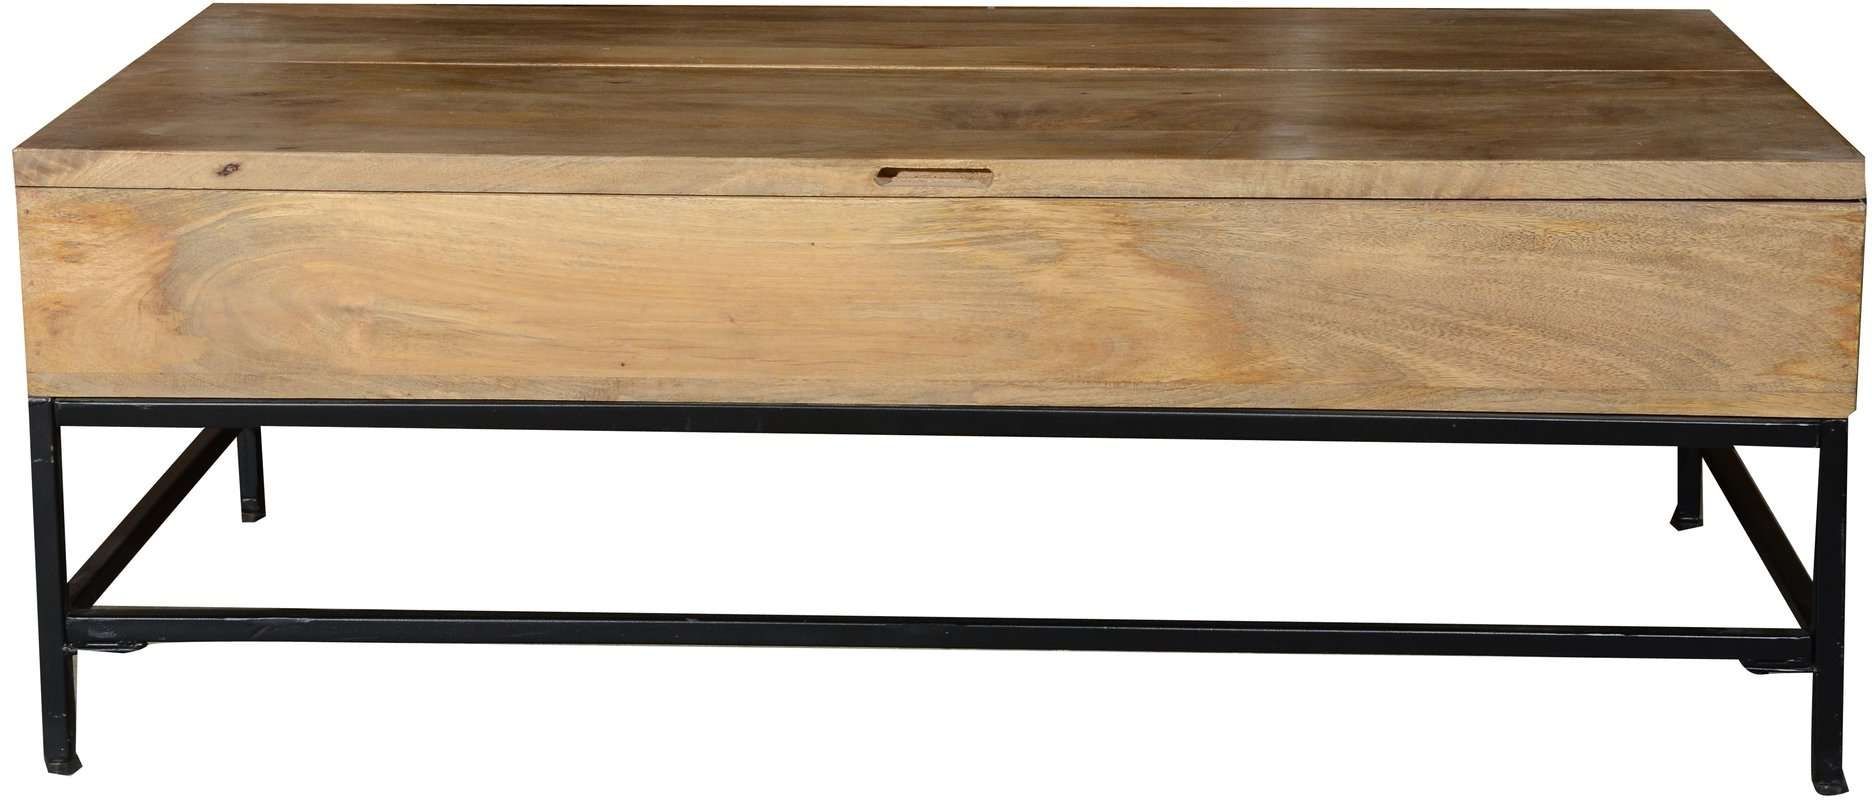 Home And Garden Direct Storage Coffee Table With Lift Top Intended For Current Storage Coffee Tables (View 16 of 20)